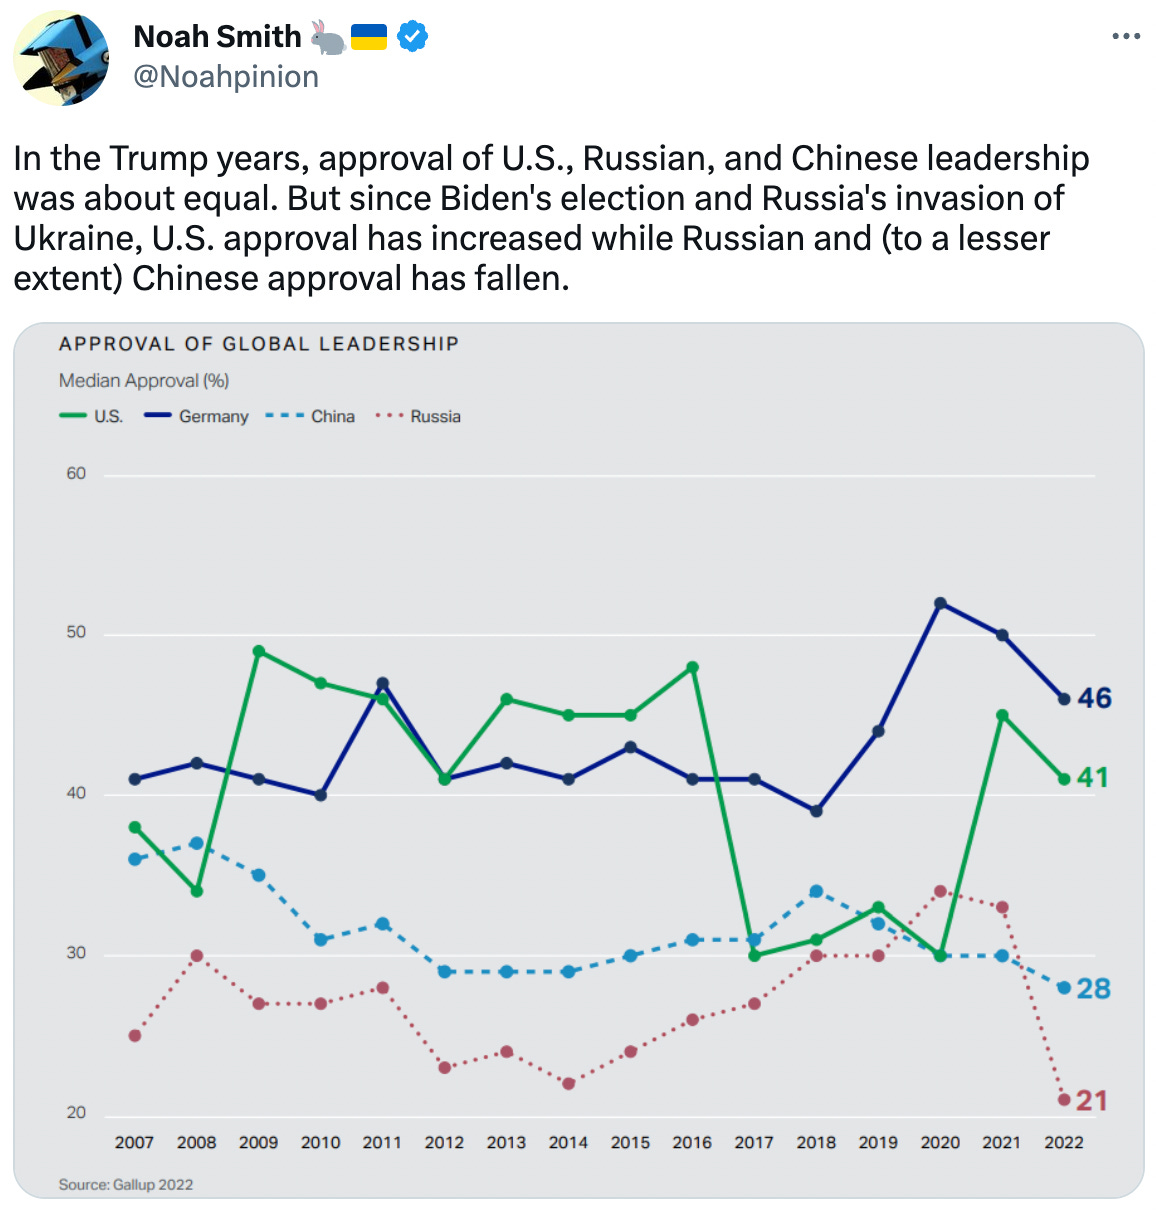 In the Trump years, approval of U.S., Russian, and Chinese leadership was about equal. But since Biden's election and Russia's invasion of Ukraine, U.S. approval has increased while Russian and (to a lesser extent) Chinese approval has fallen.